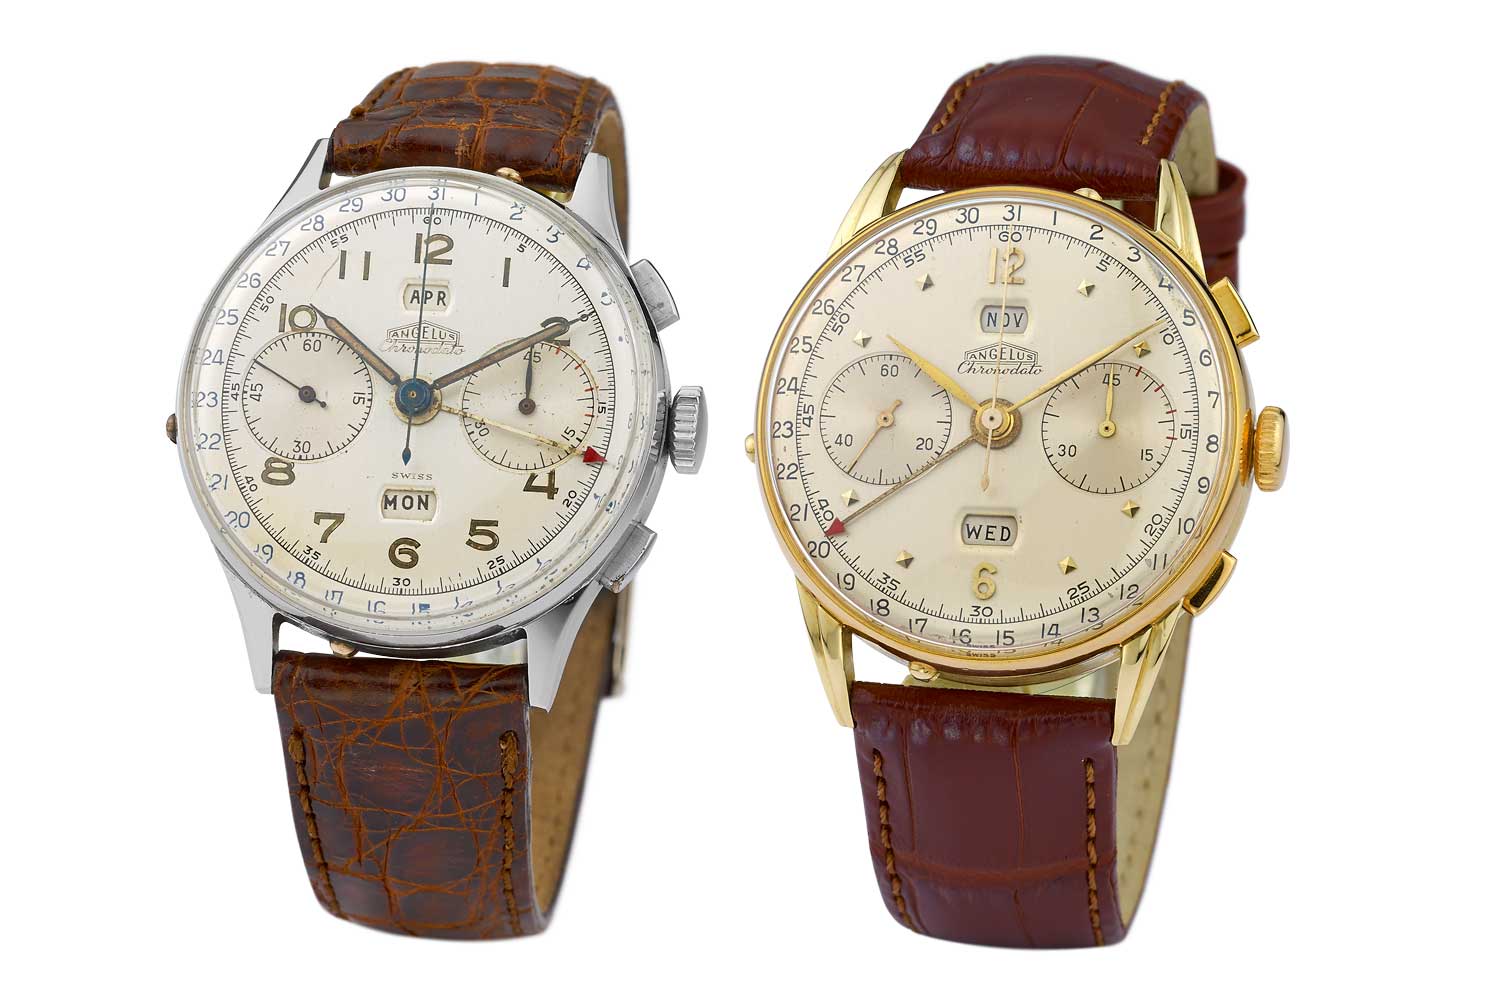 Vintage Angelus Chronodate watches with full calendar function